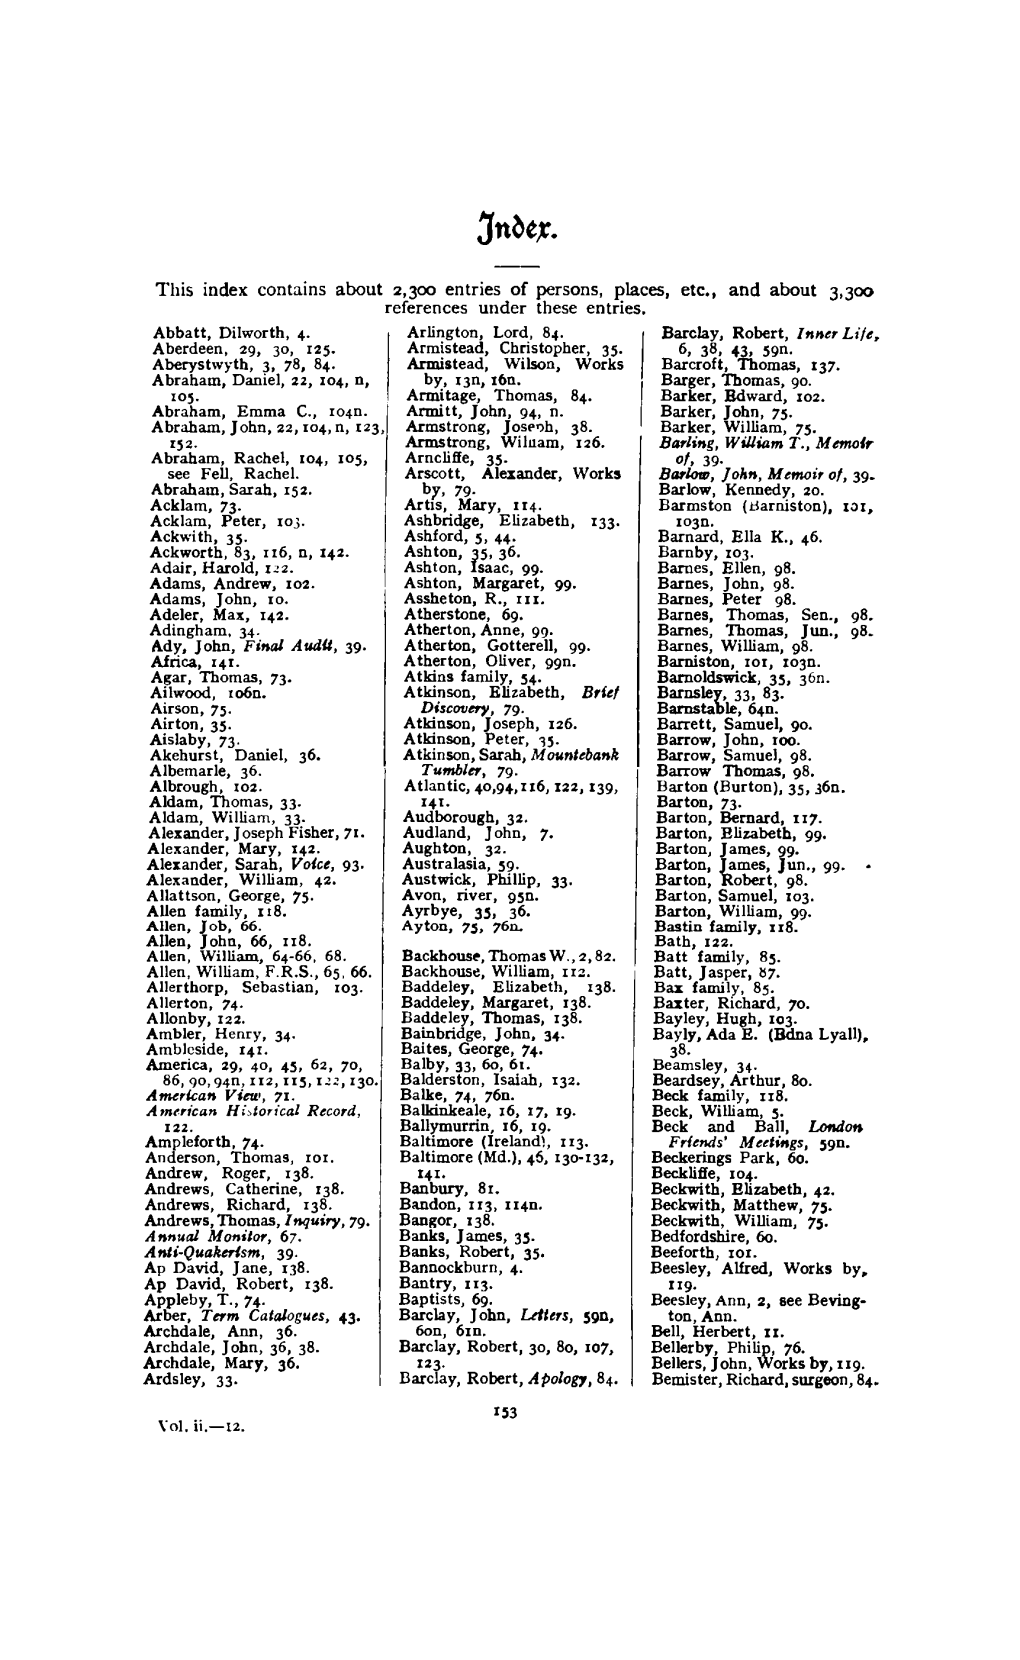 This Index Contains About 2,300 Entries of Persons, Places, Etc., and About 3,300 References Under These Entries